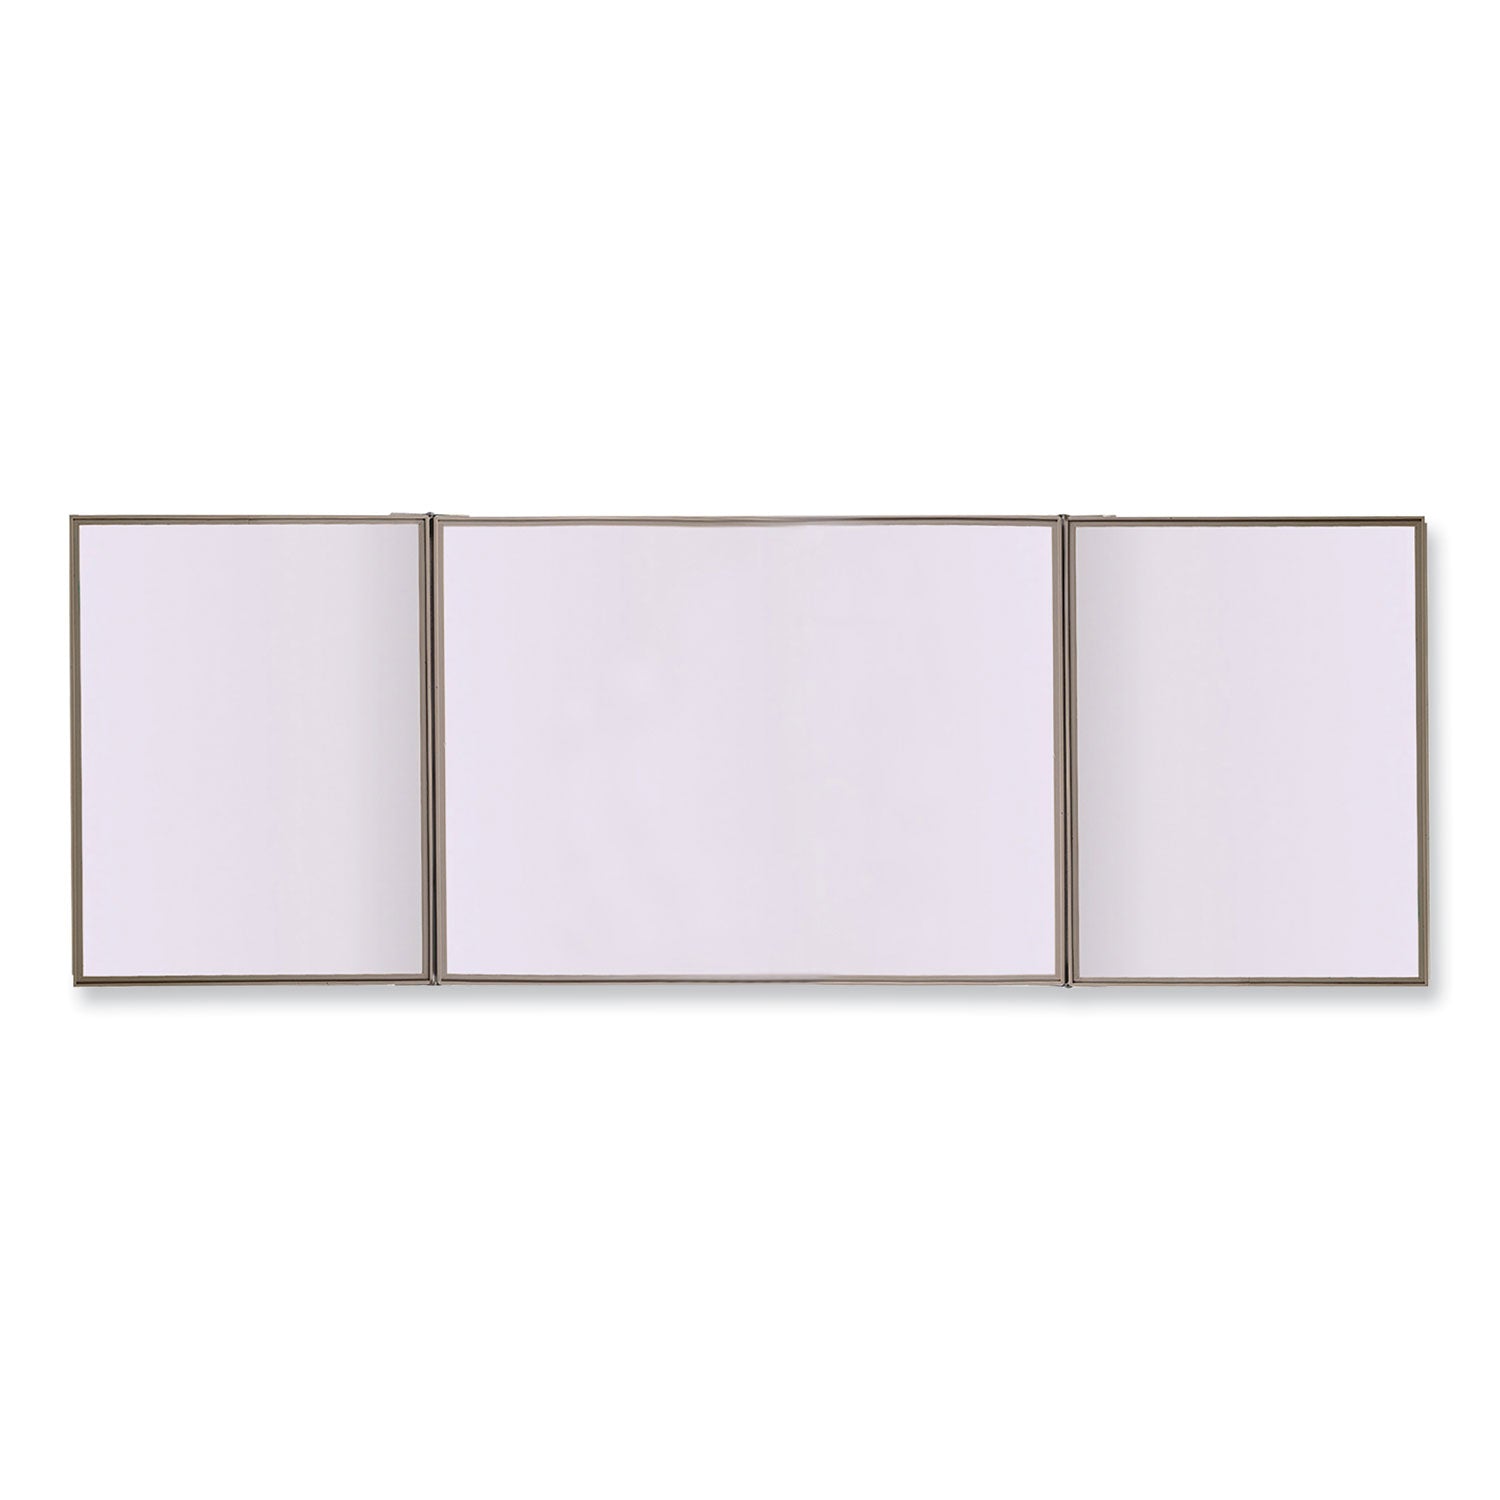 visuall-pc-whiteboard-cabinet-blue-fabric-bulletin-board-exterior-doors-36x24-aluminum-frame-ships-in-7-10-business-days_ghe41301 - 3